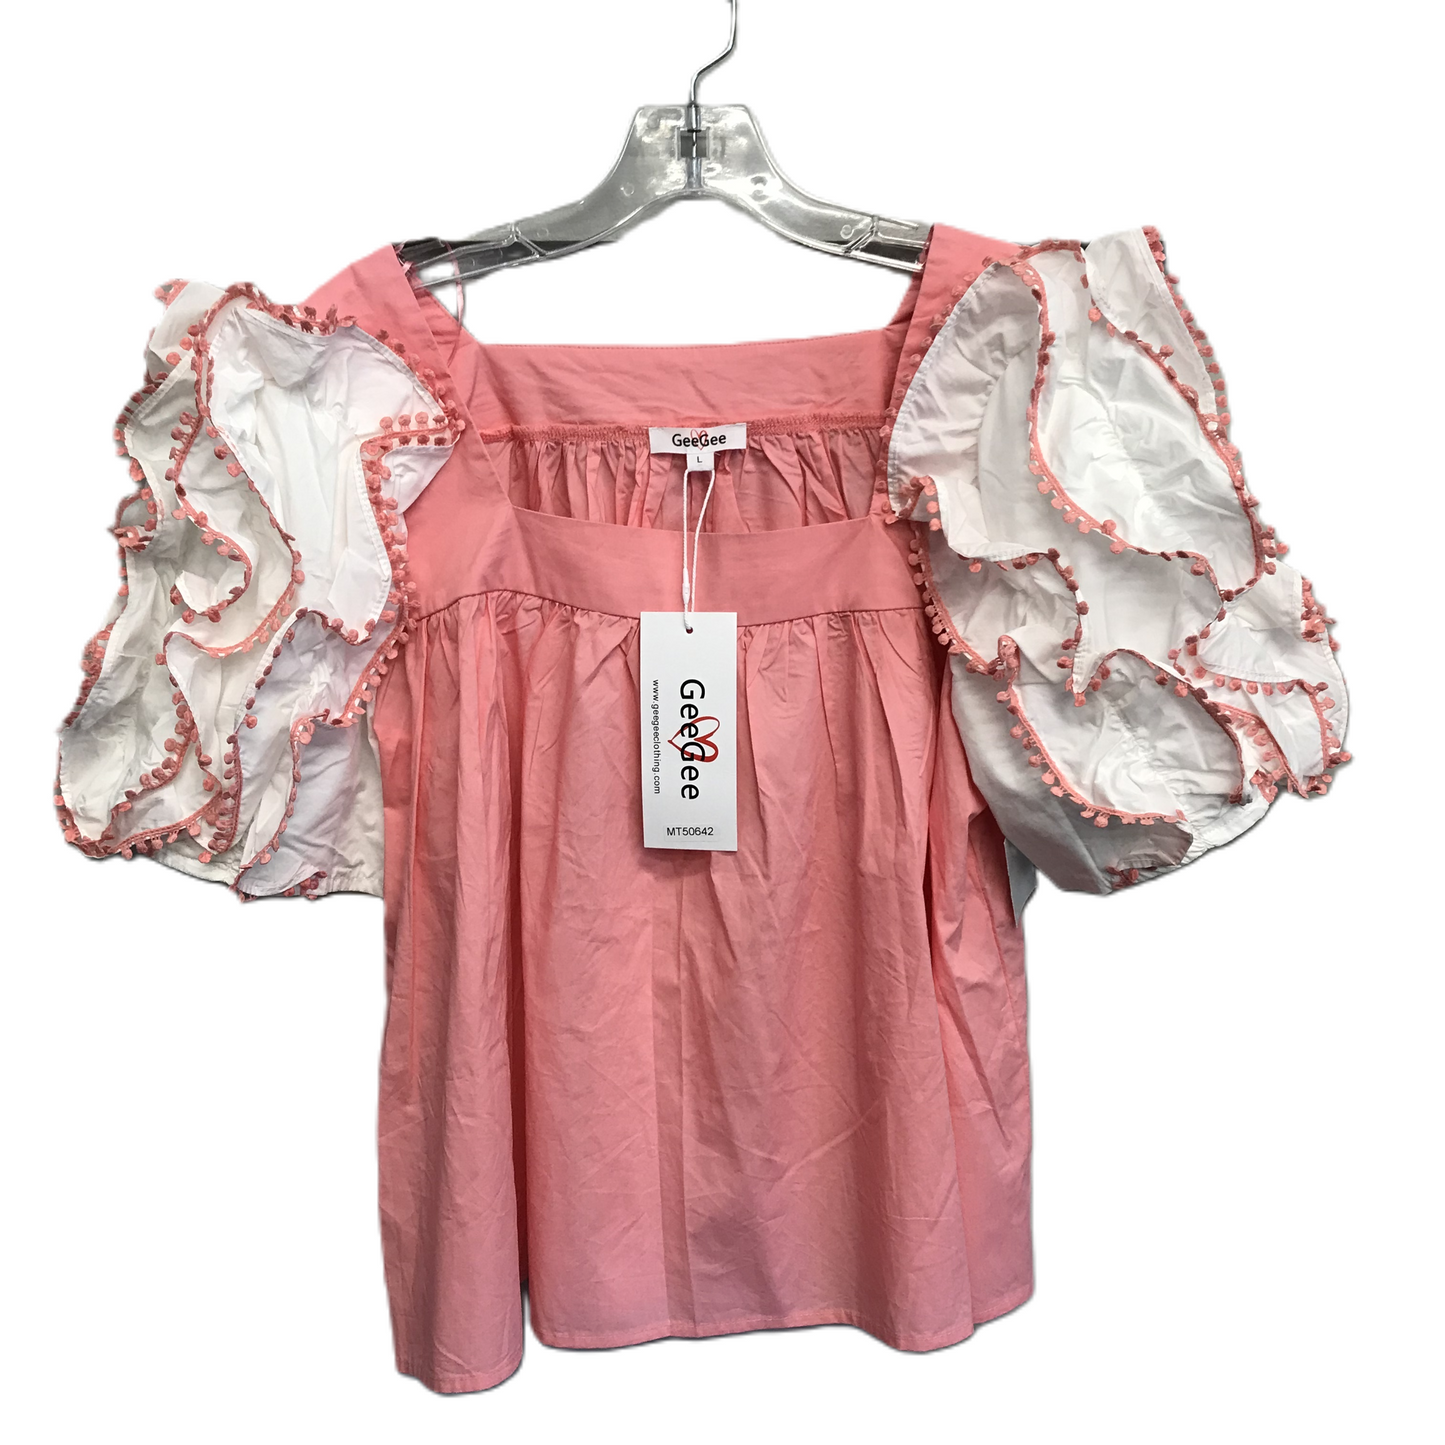 Pink Top Short Sleeve By GEEGEE, Size: L